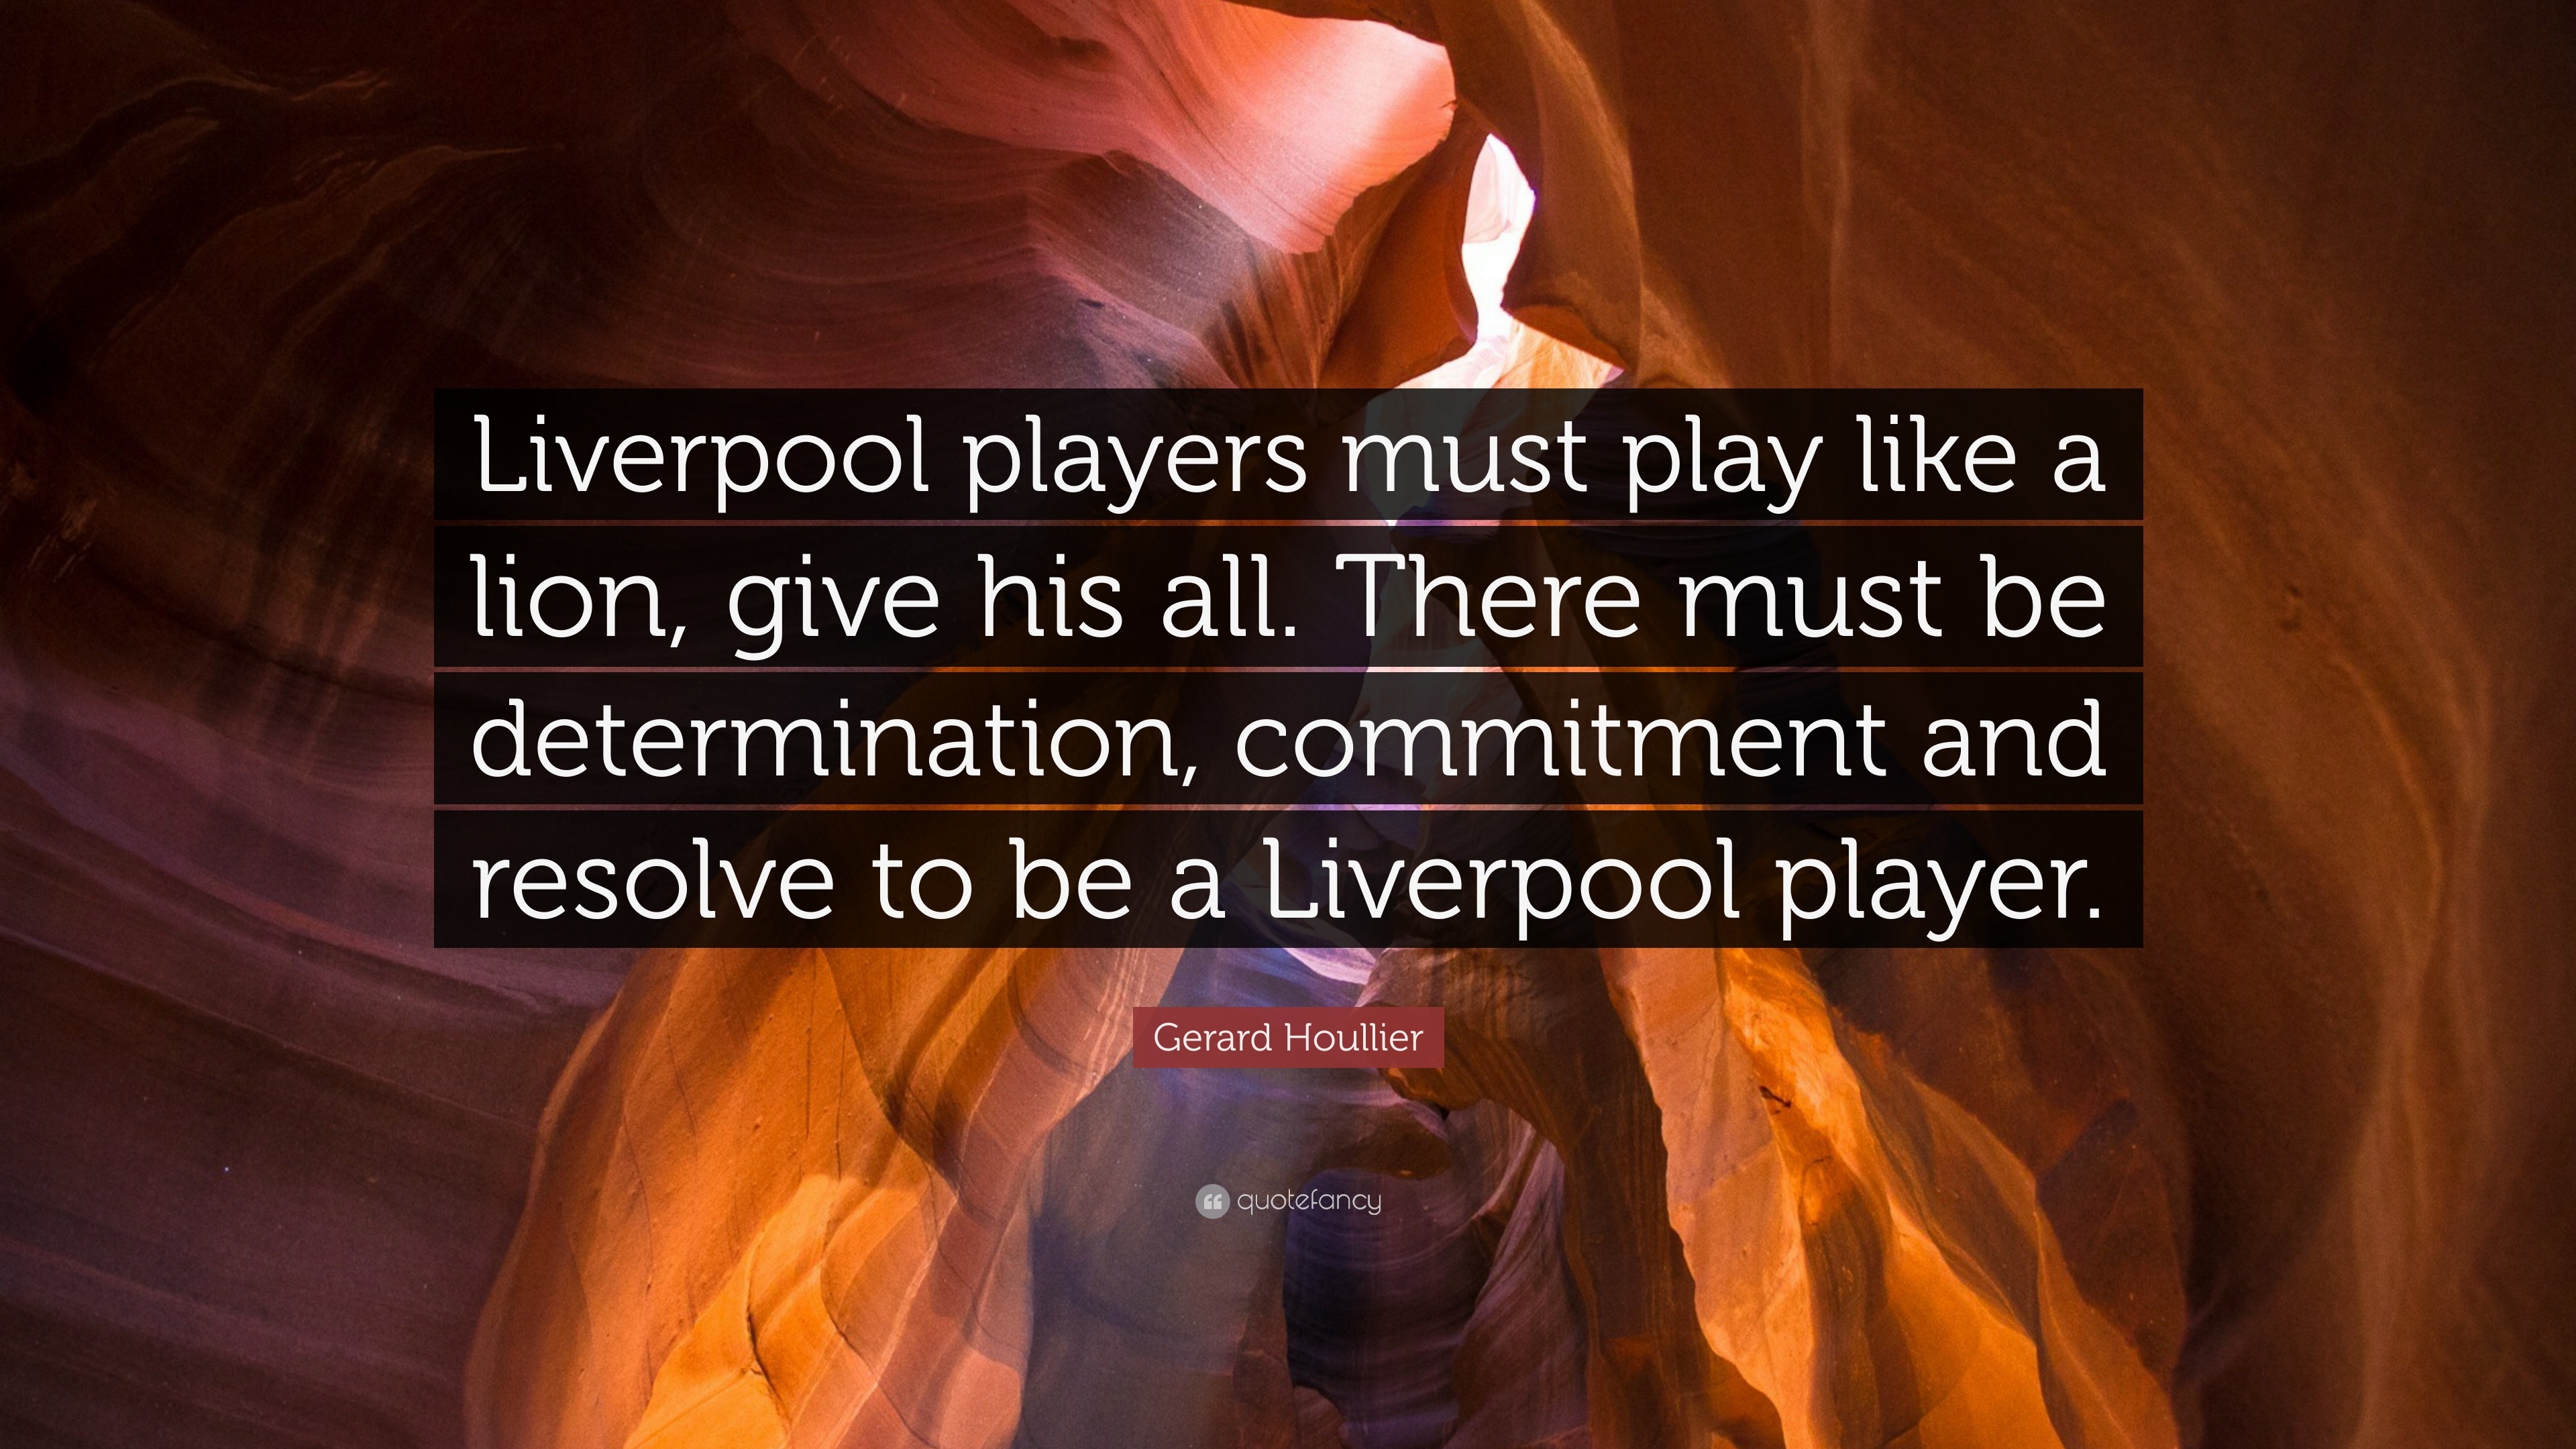 Gerard Houllier Quote: “Liverpool players must play like a lion, give ...